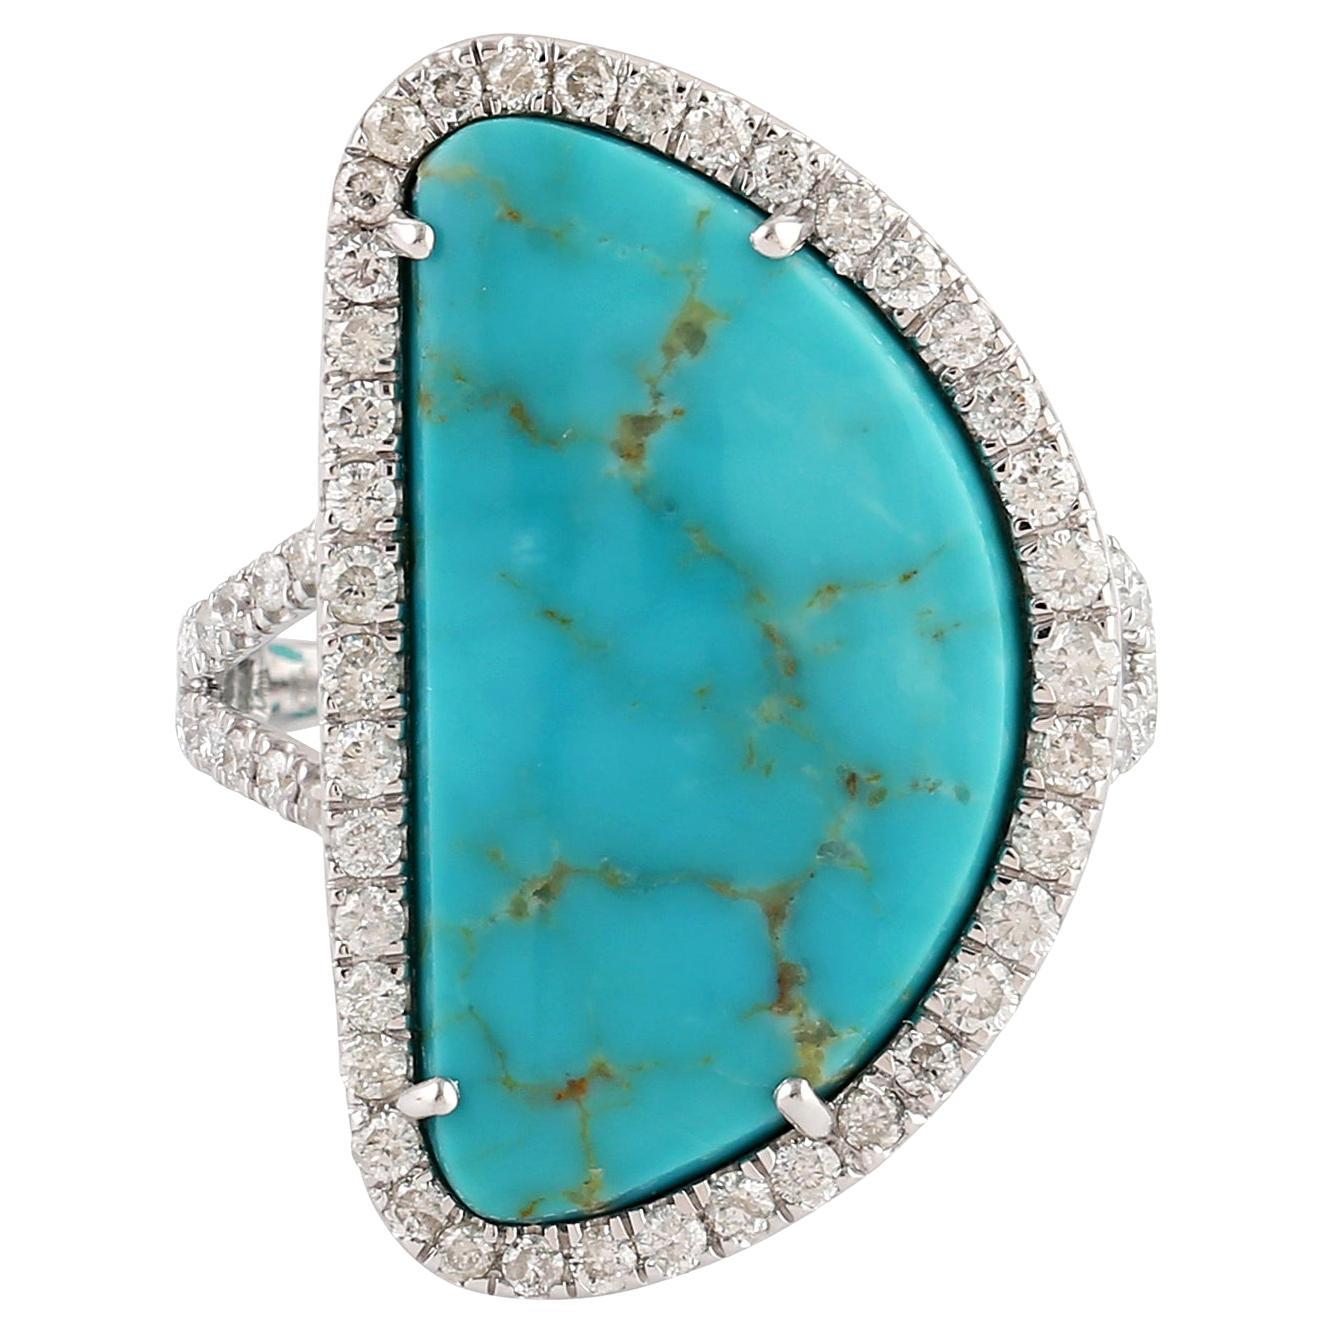 7.60ct Natural Turquoise Cocktail Ring With Diamonds Made In 18k White Gold For Sale